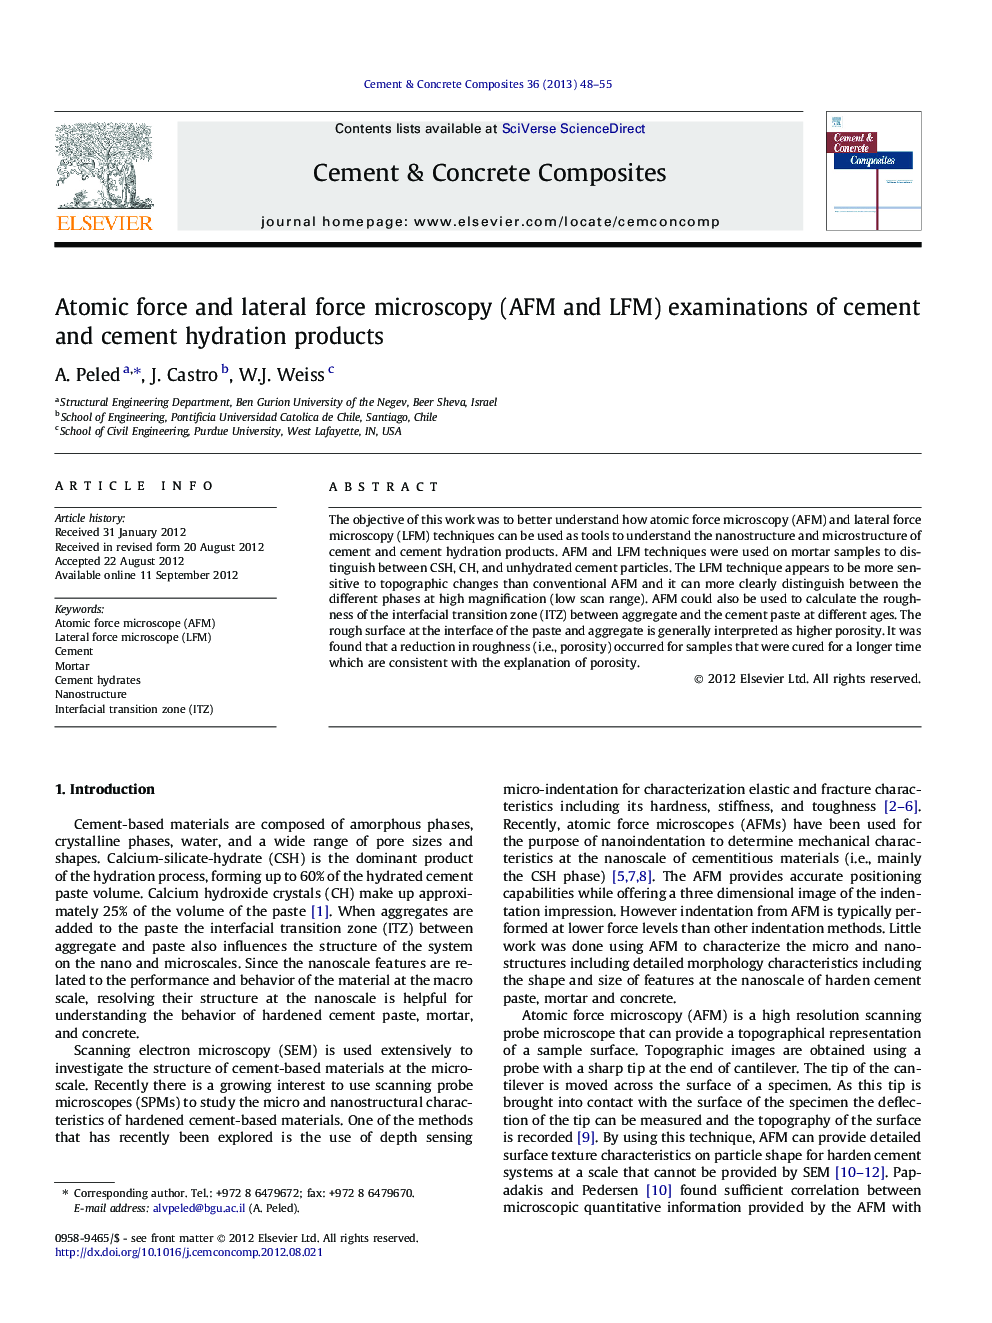 Atomic force and lateral force microscopy (AFM and LFM) examinations of cement and cement hydration products